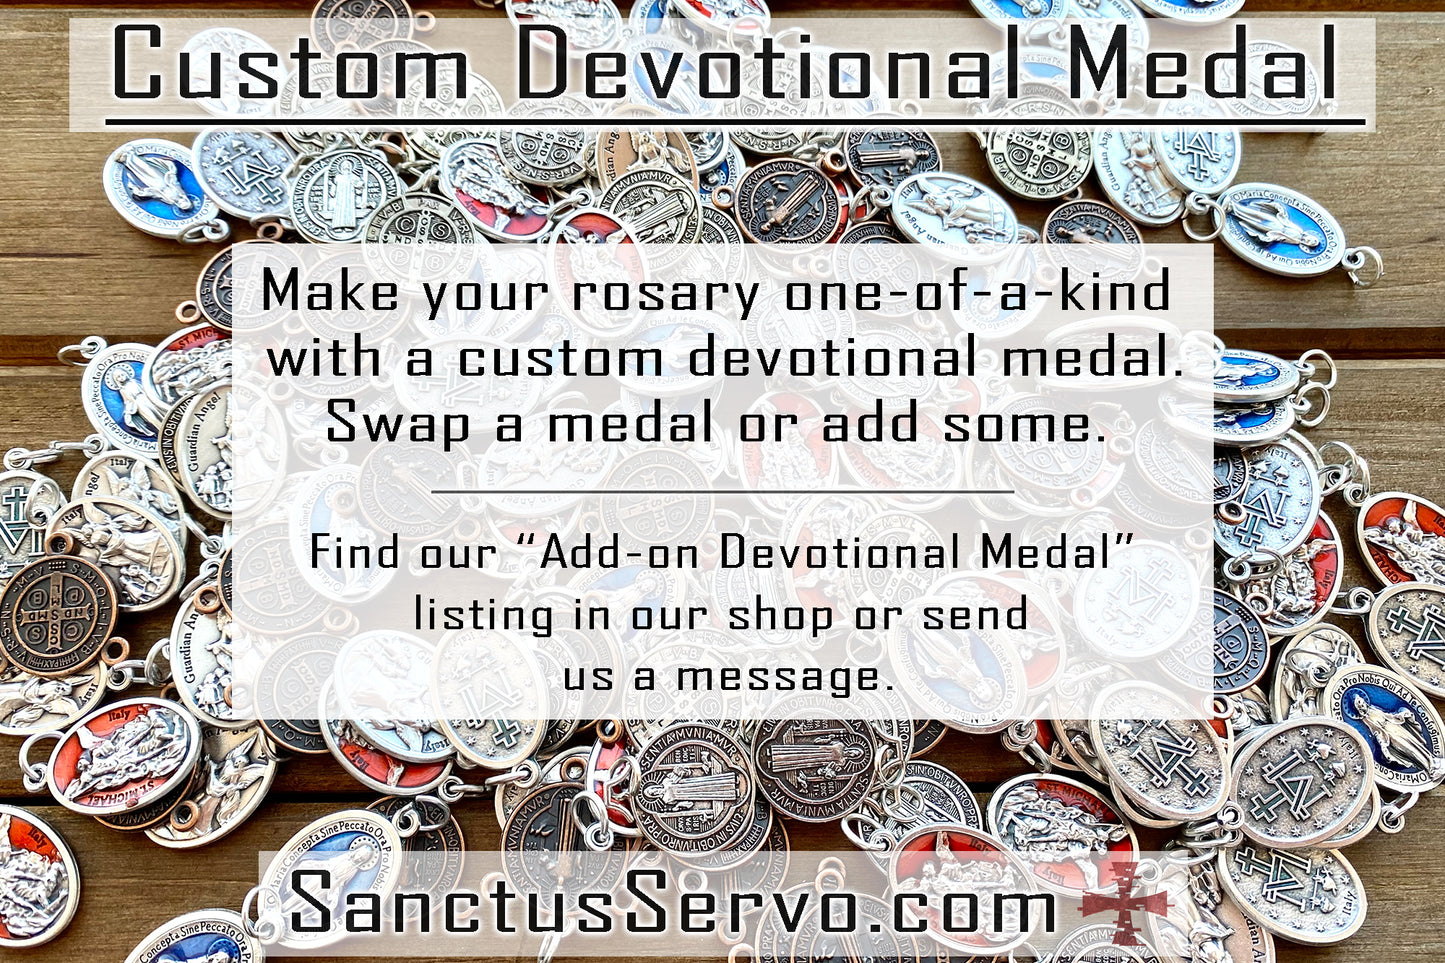 Enhance your Catholic prayer experience with our Add-on Devotional Medal - Catholic Patron Saint Medals collection. Choose from over 60 options to deepen devotion and customize your rosary, perfect for honoring patron saints or adding personal touch to gifts.